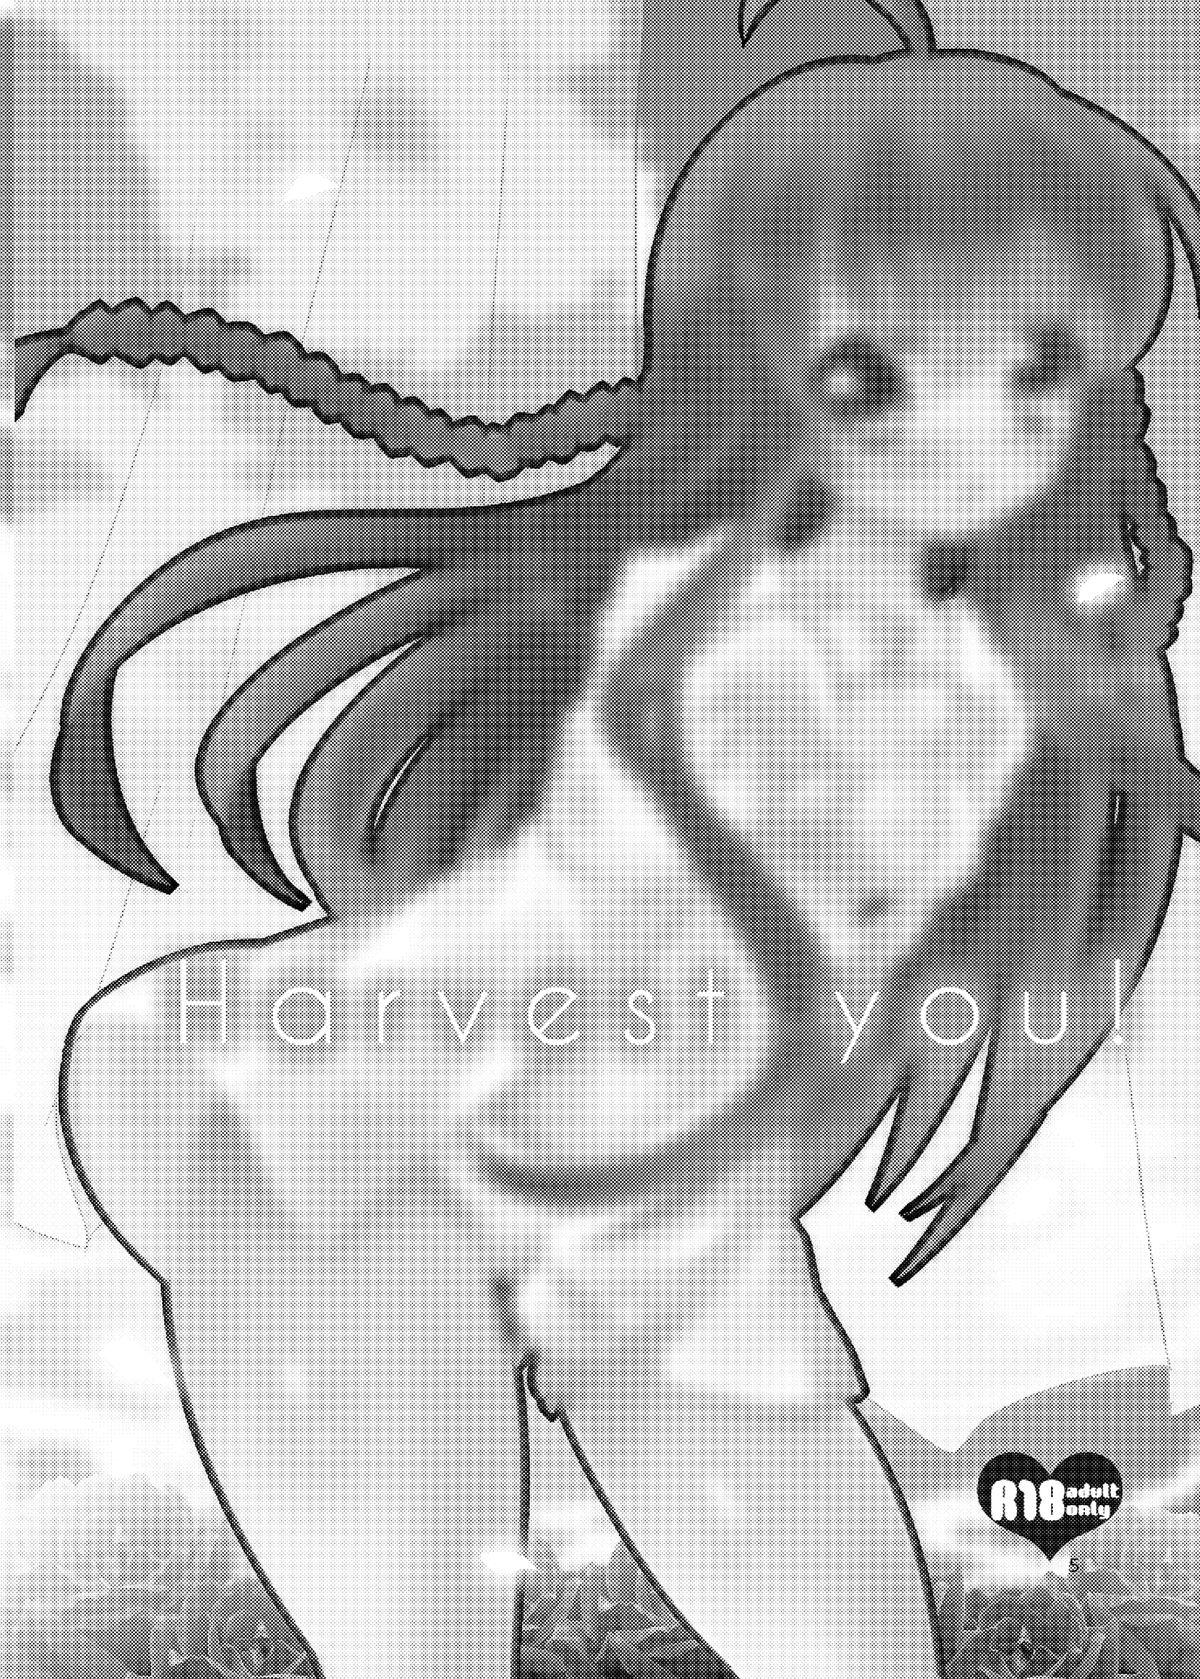 Cocks Harvest you! - Rewrite Grosso - Page 4